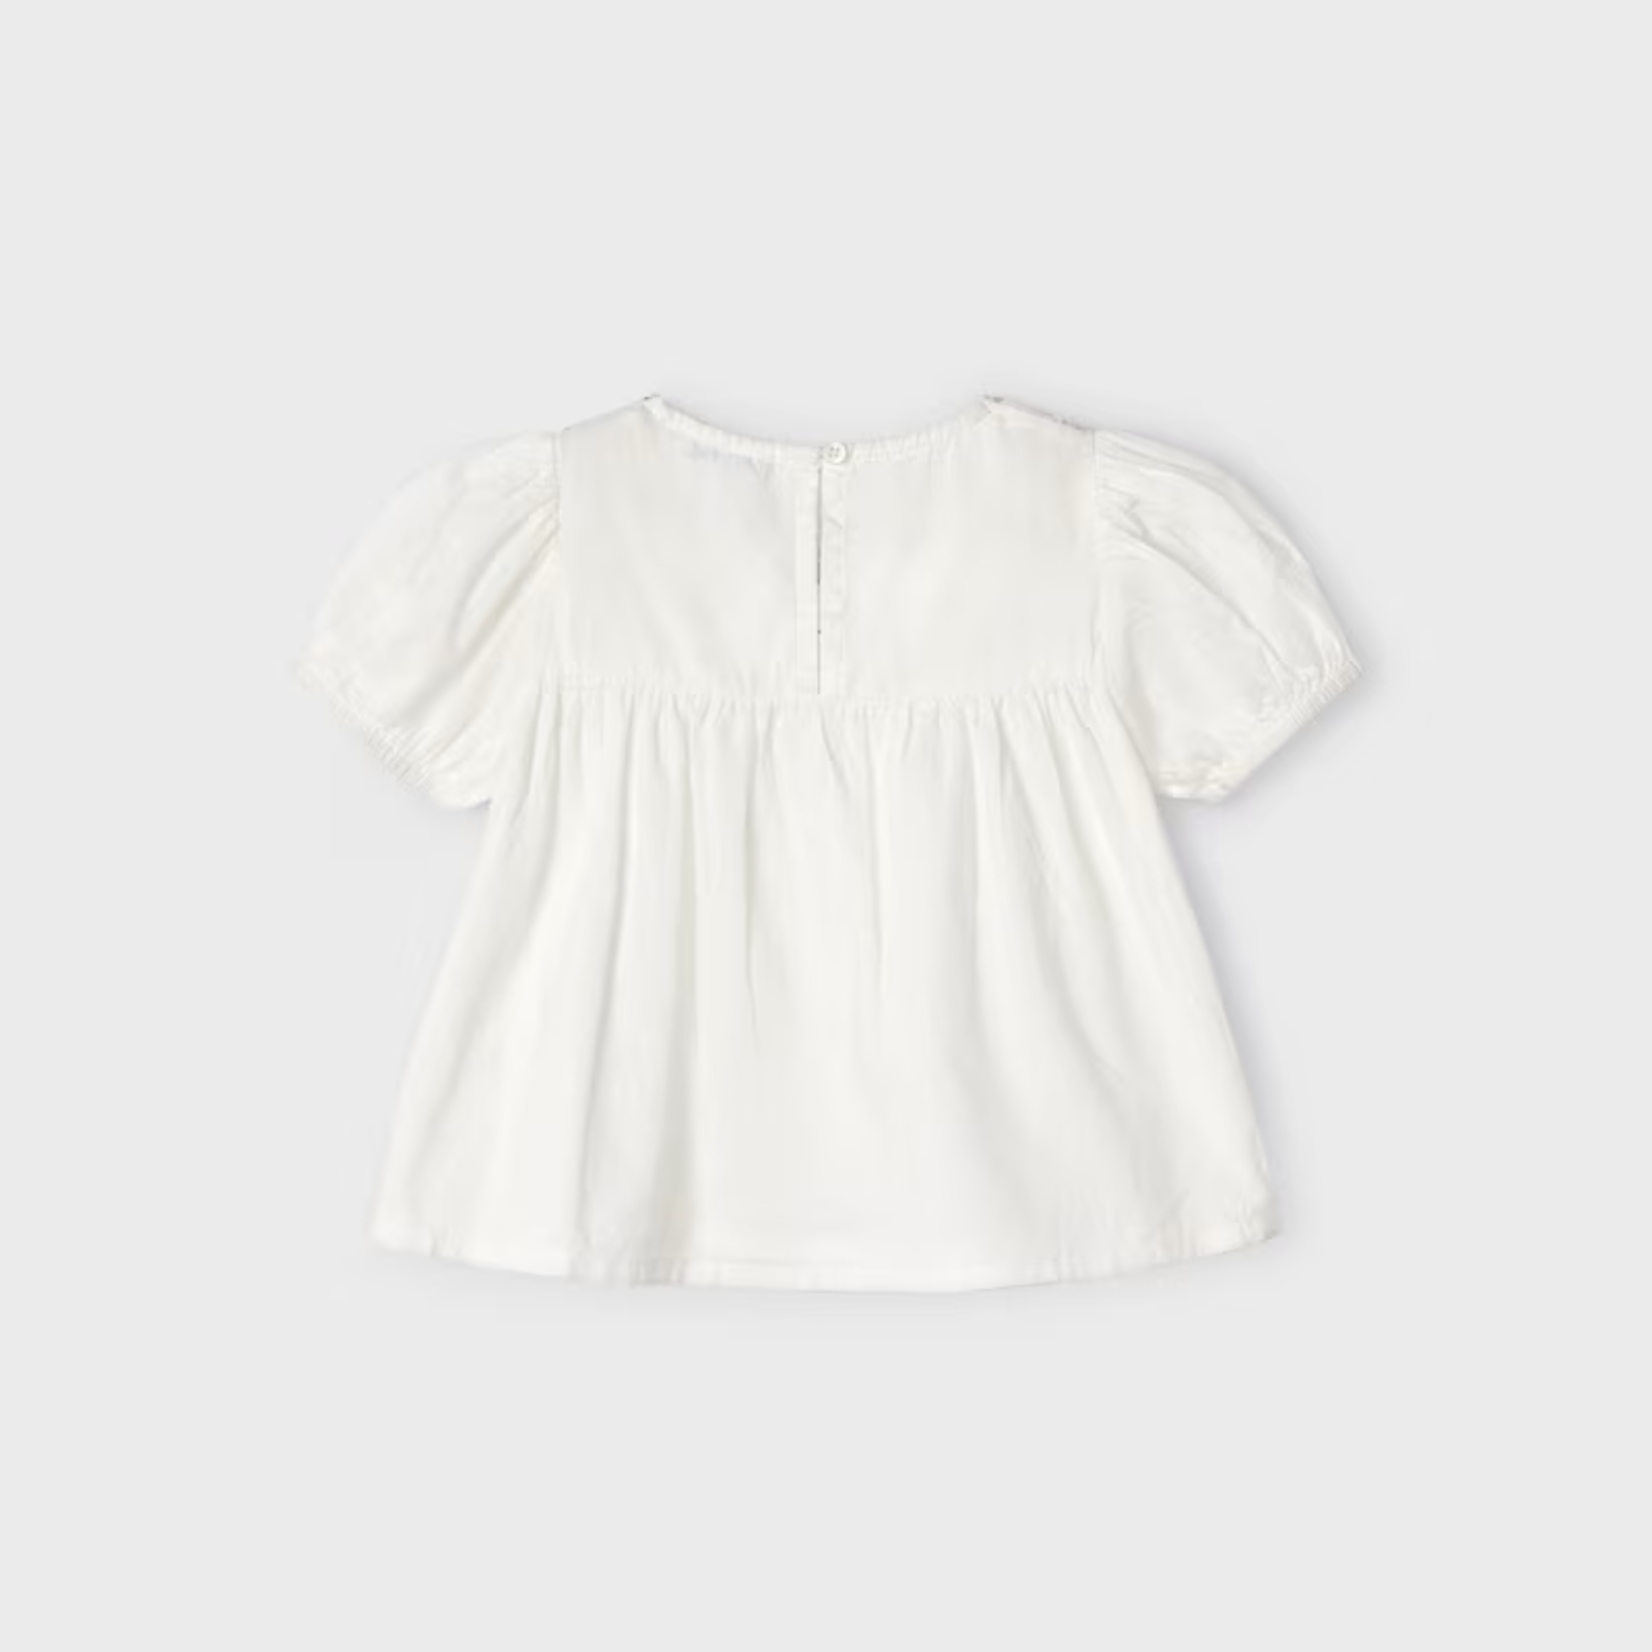 Mayoral Mayoral Embroidered Blouse Blush/White